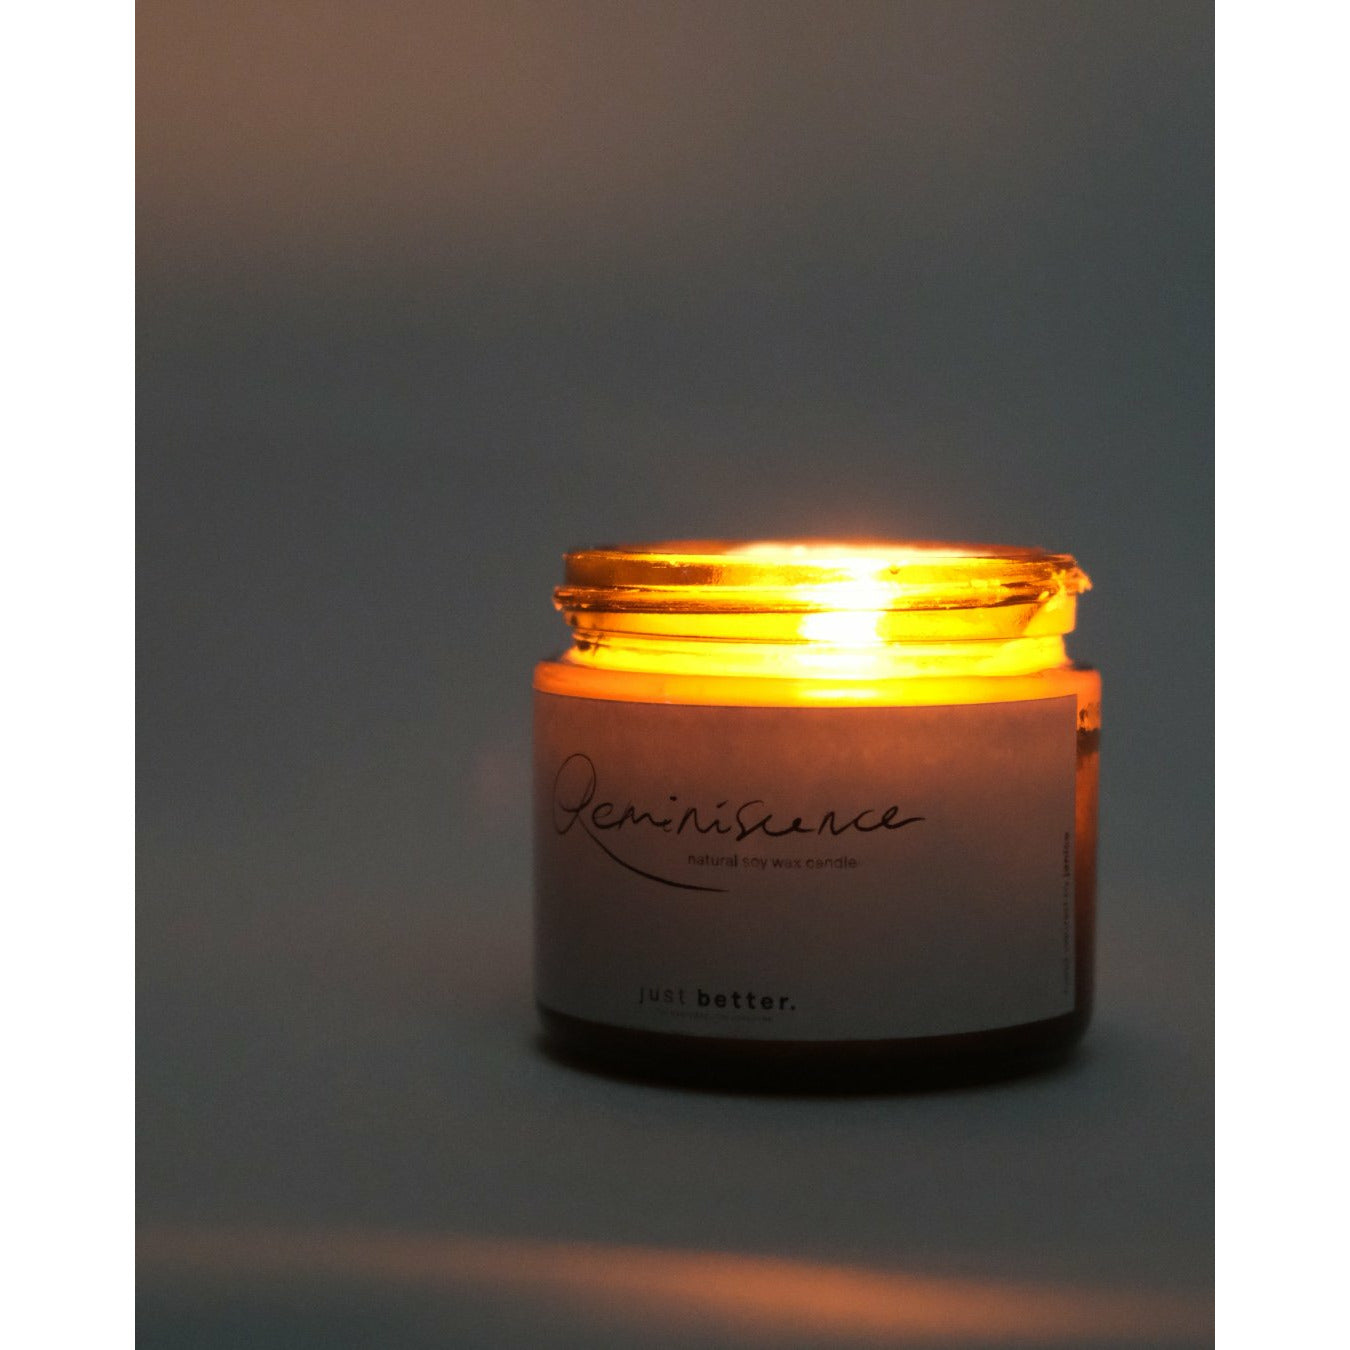 Reminiscence Candle